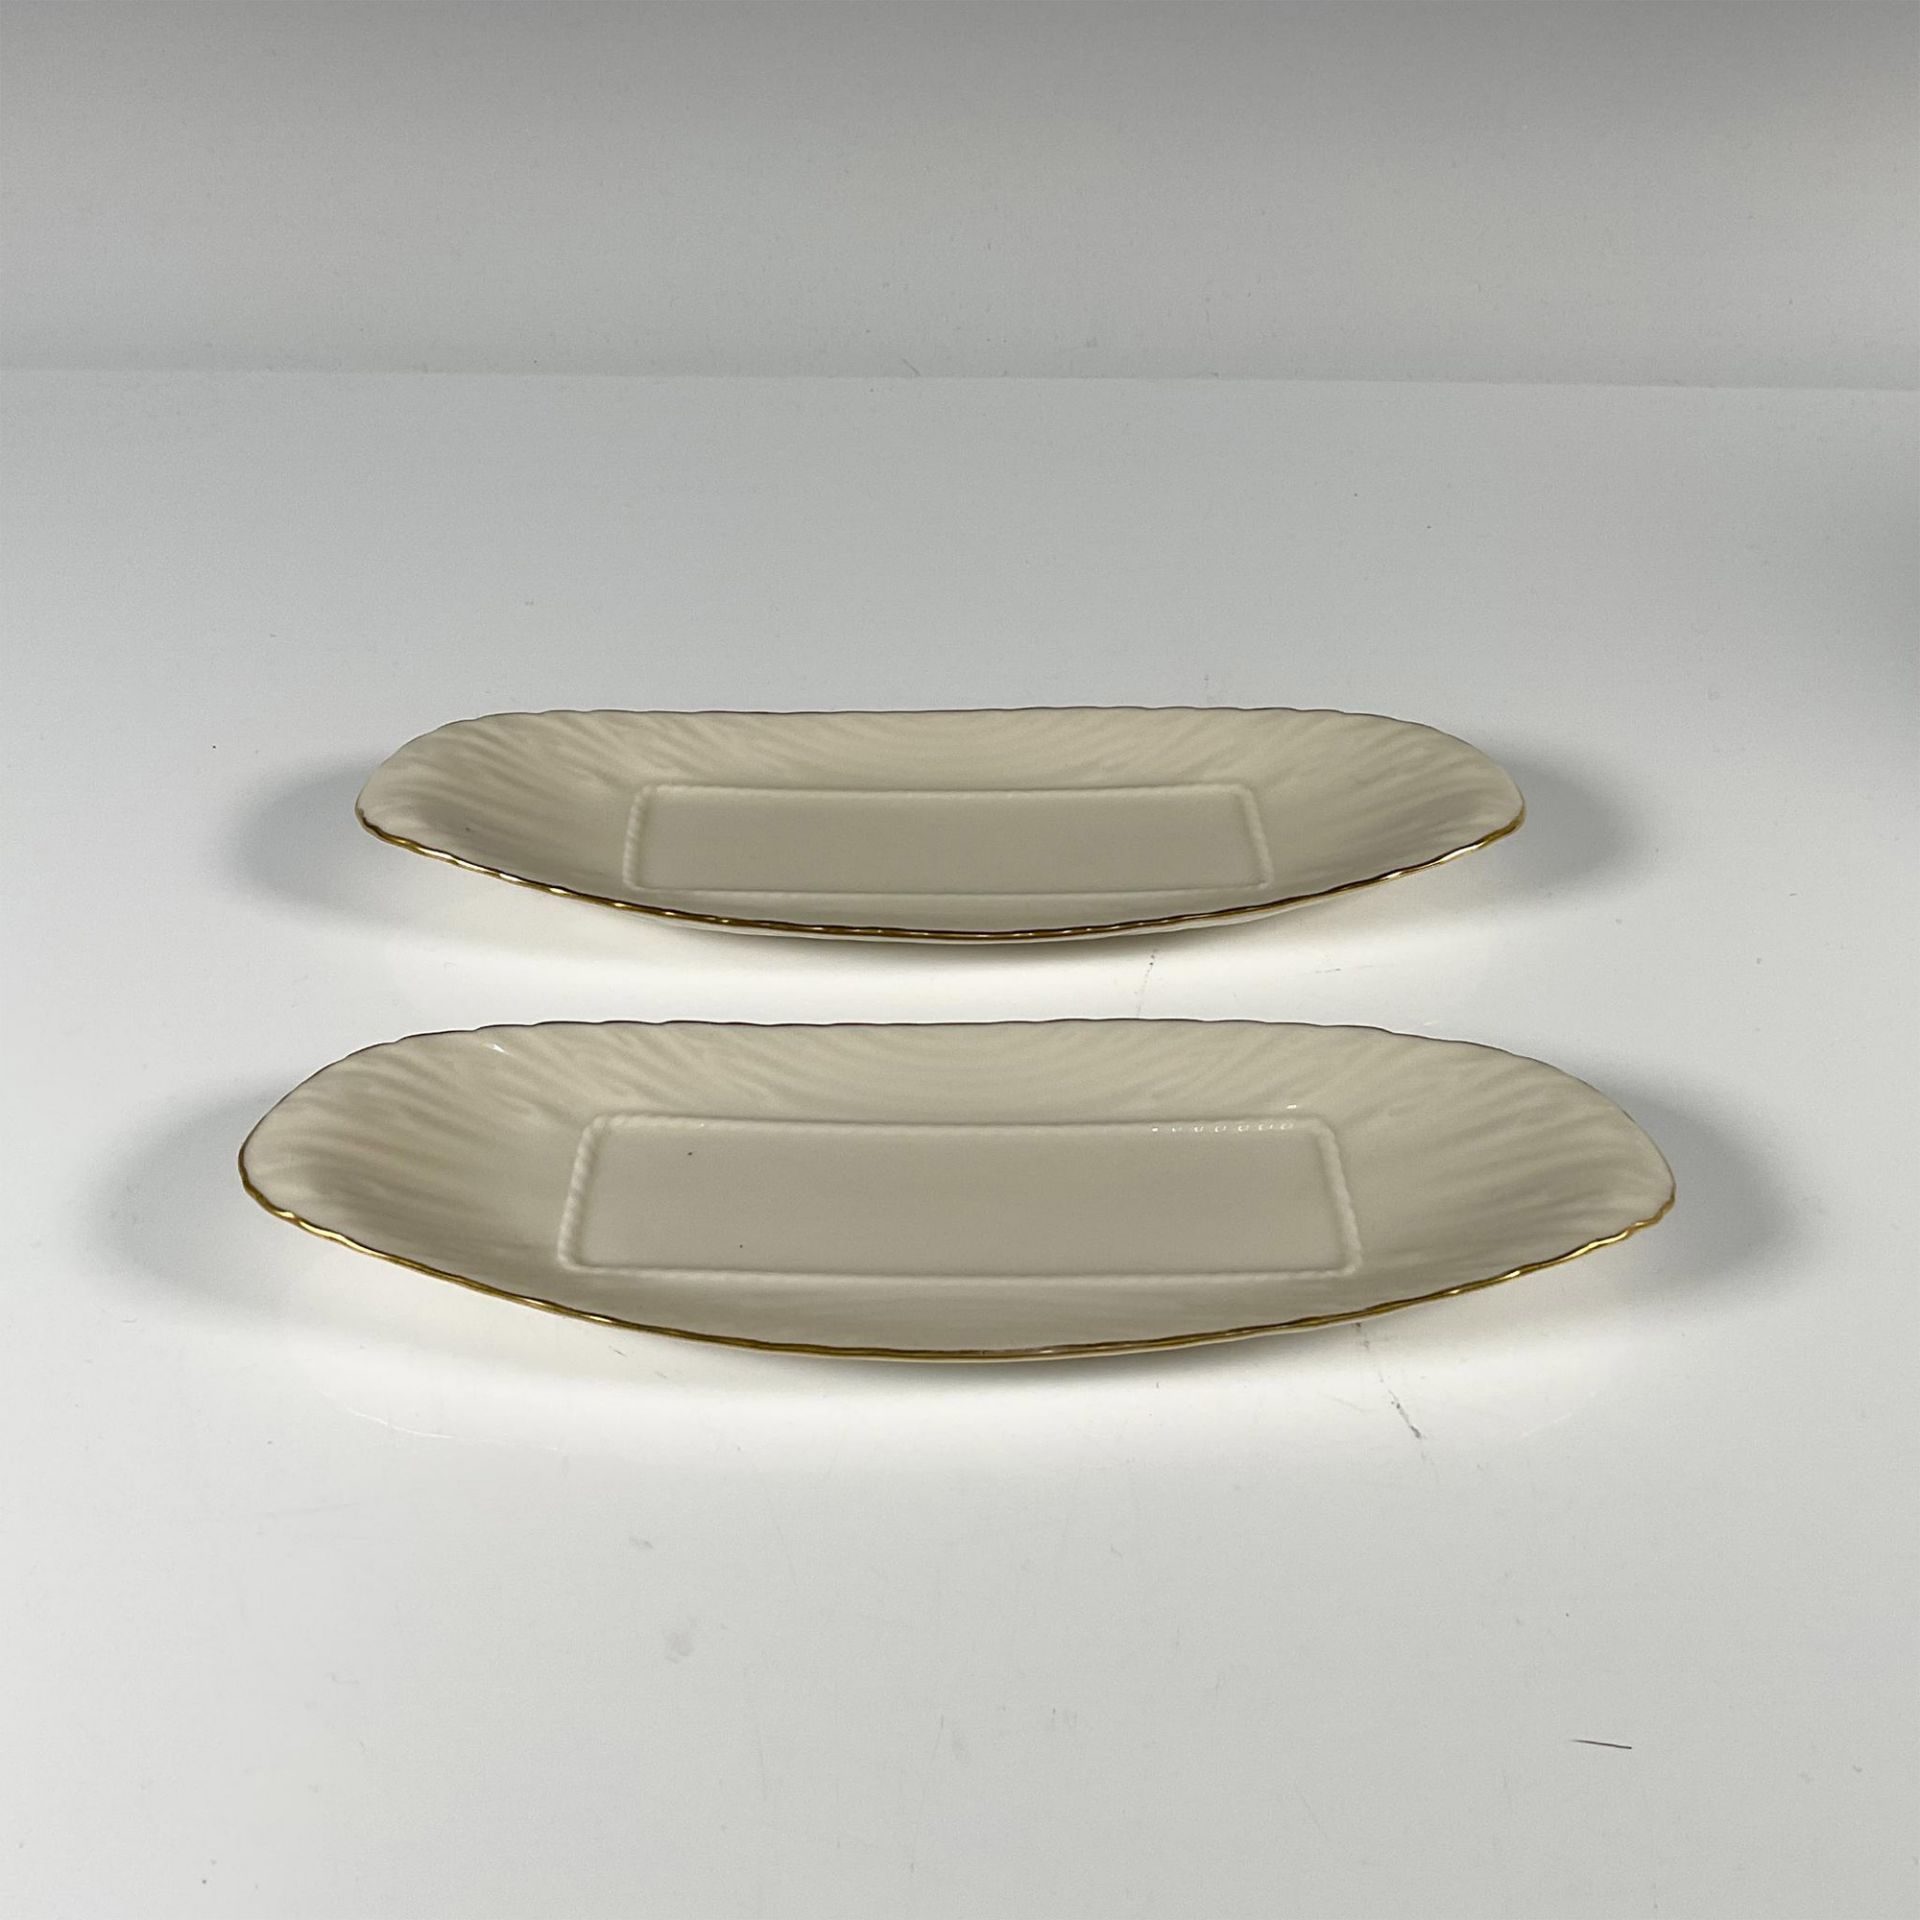 2pc Lenox Open Butter Dishes - Image 2 of 3